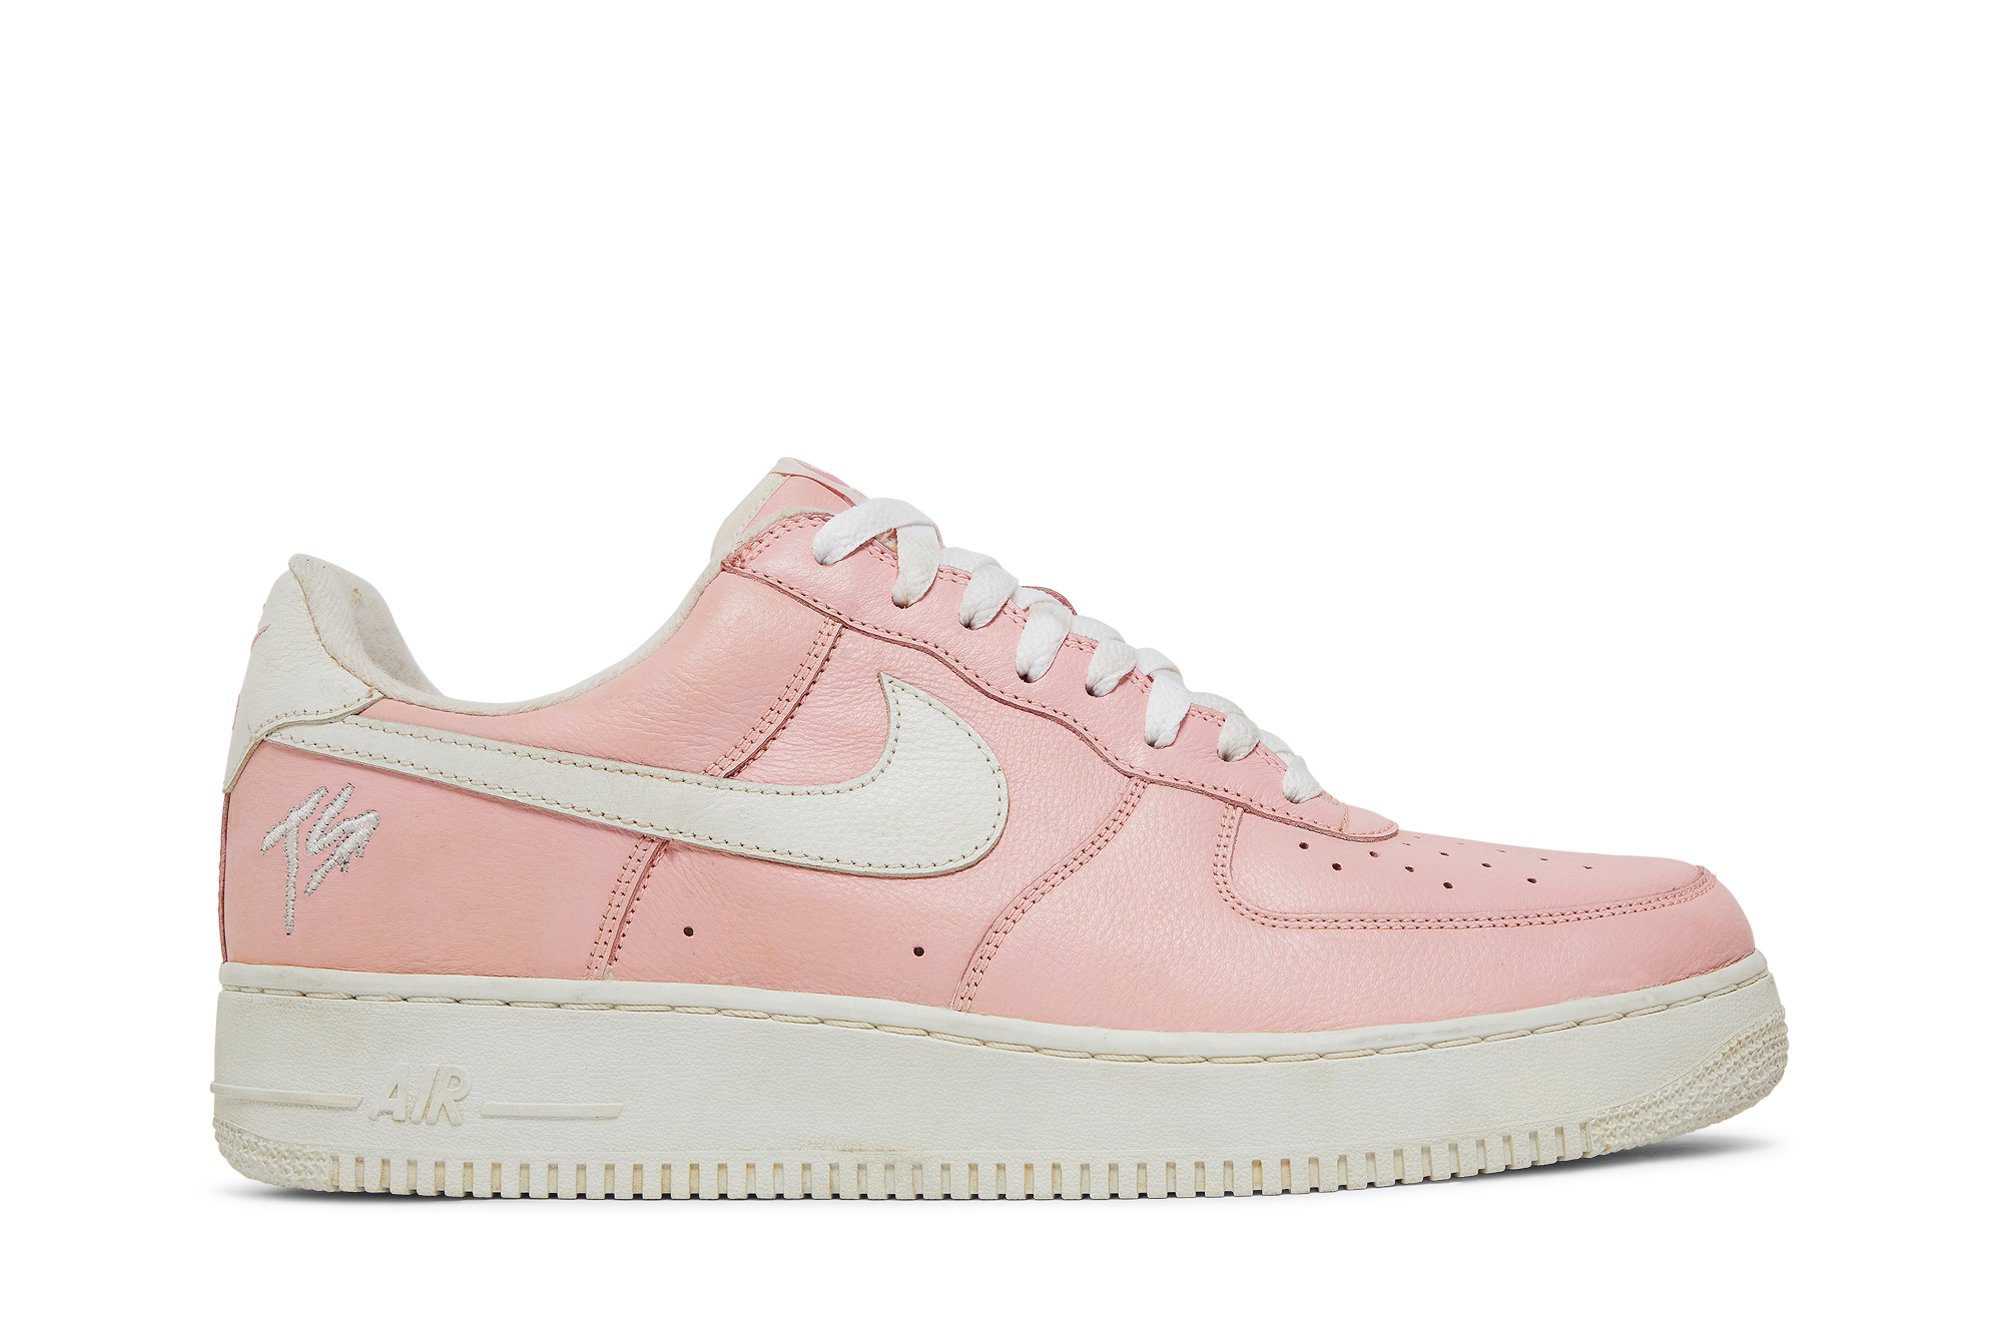 terror squad air force 1 pink